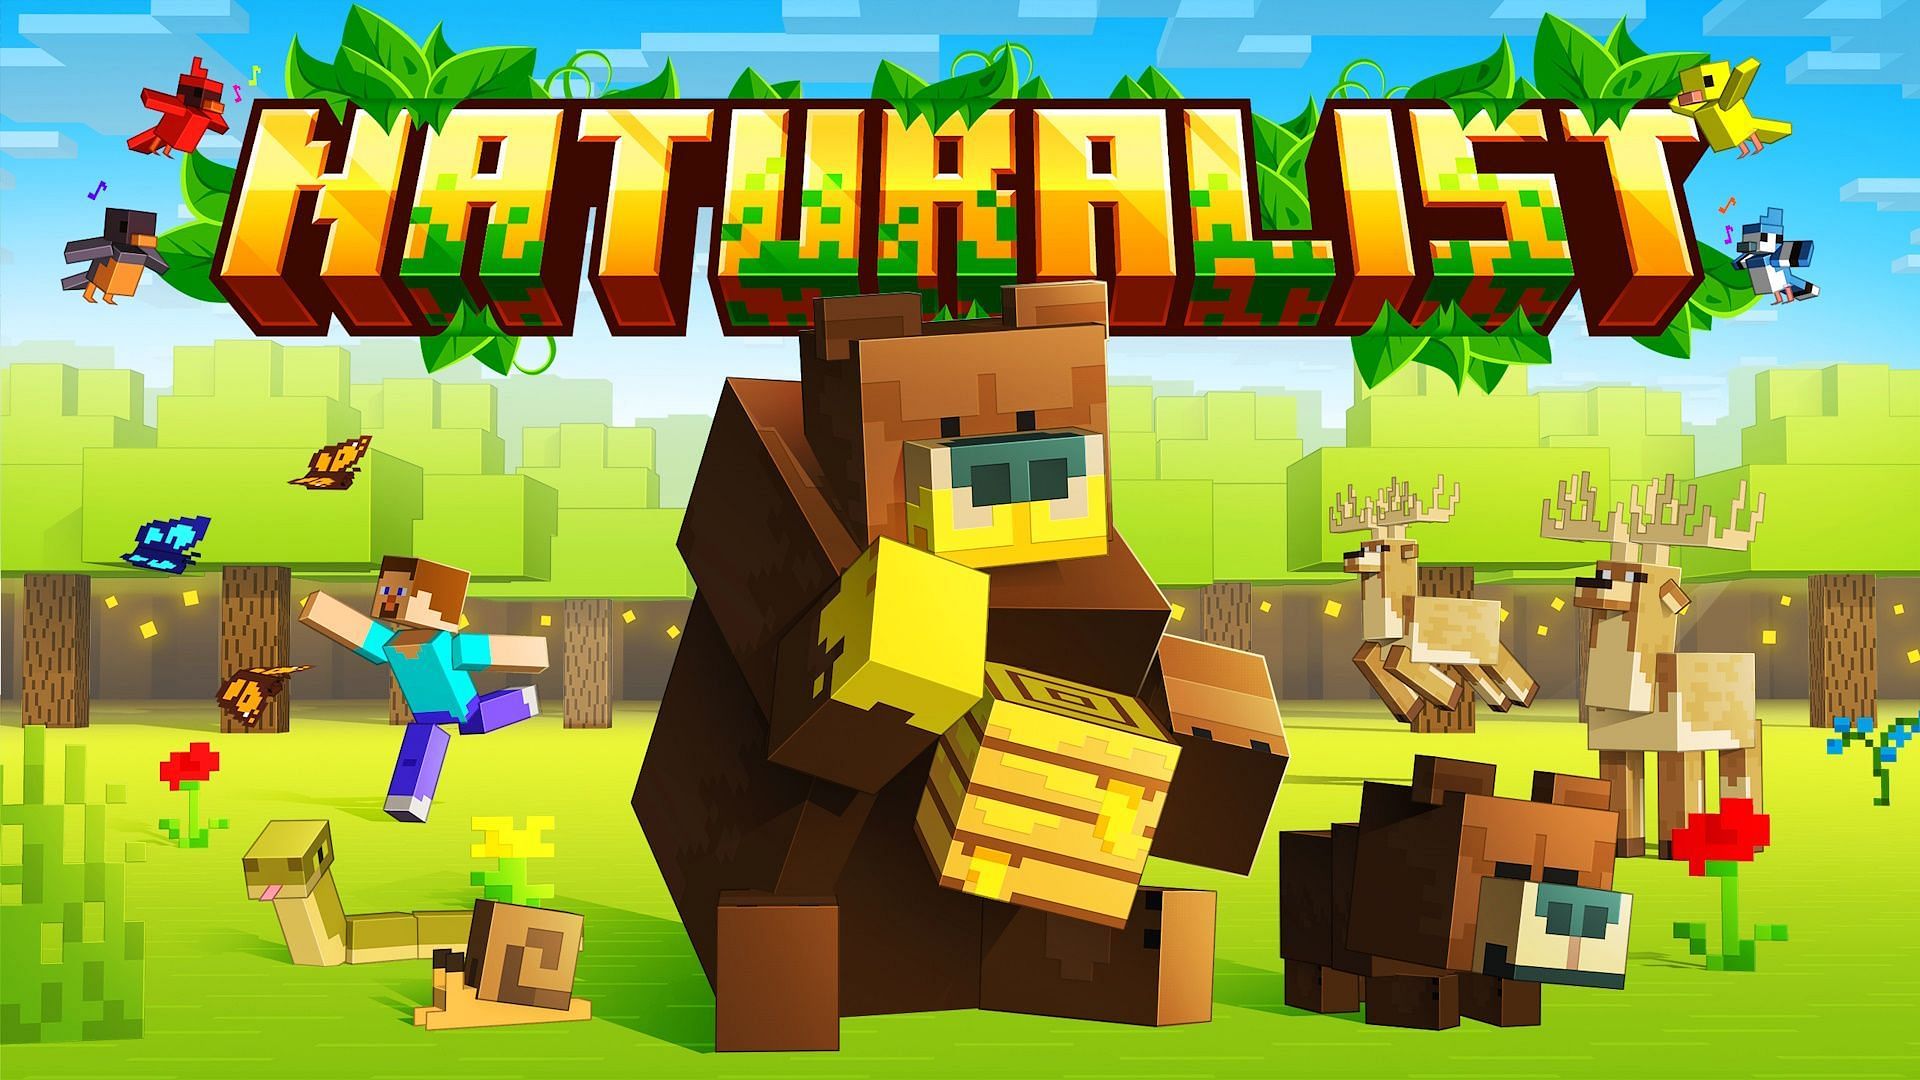 Naturalist is amazing for players who enjoy exploring different biomes (Image via Starfish_Studios)